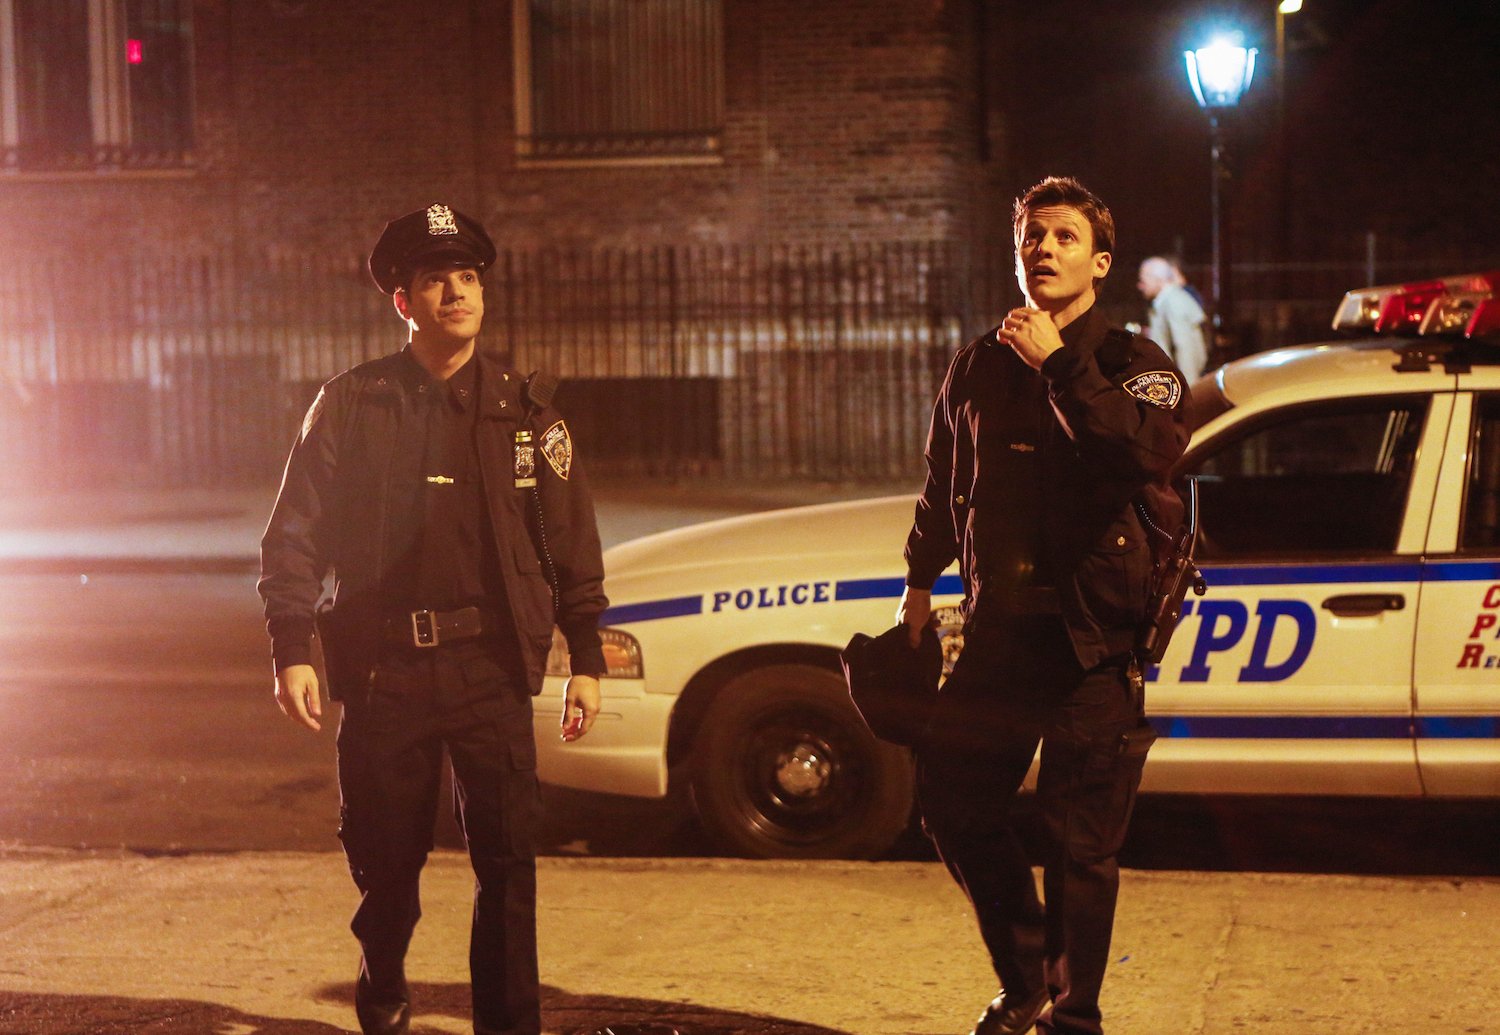 Vinny (left, Sebastian Sozzi) and Jamie (right, Will Estes) standing on the street in police uniform in front of an NYPD car